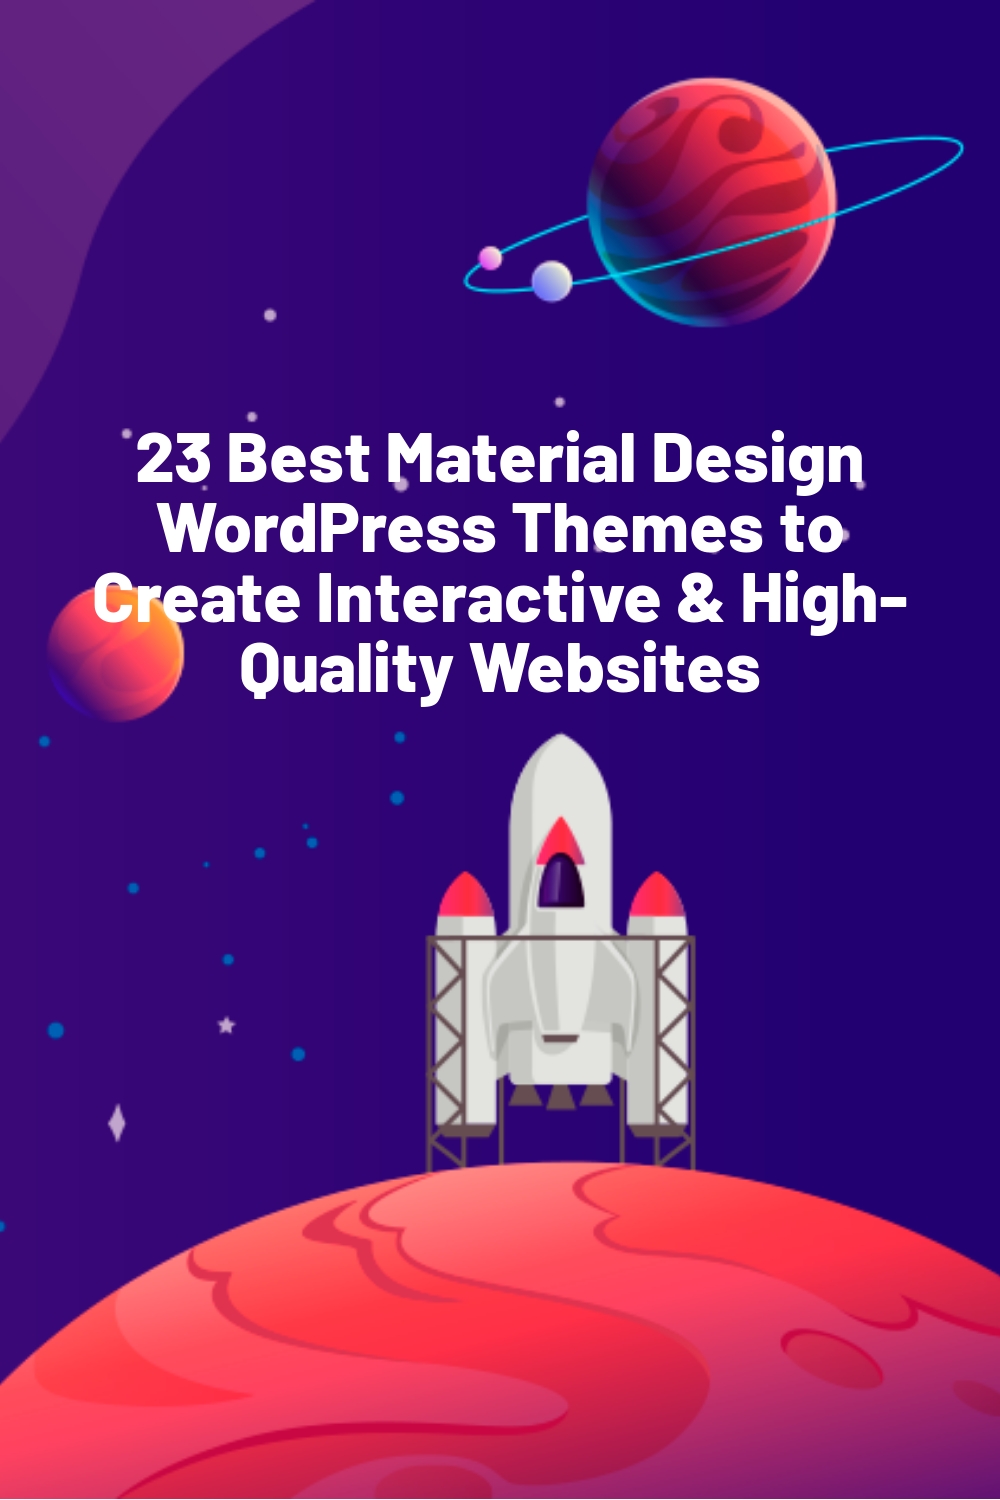 23 Best Material Design WordPress Themes to Create Interactive & High-Quality Websites